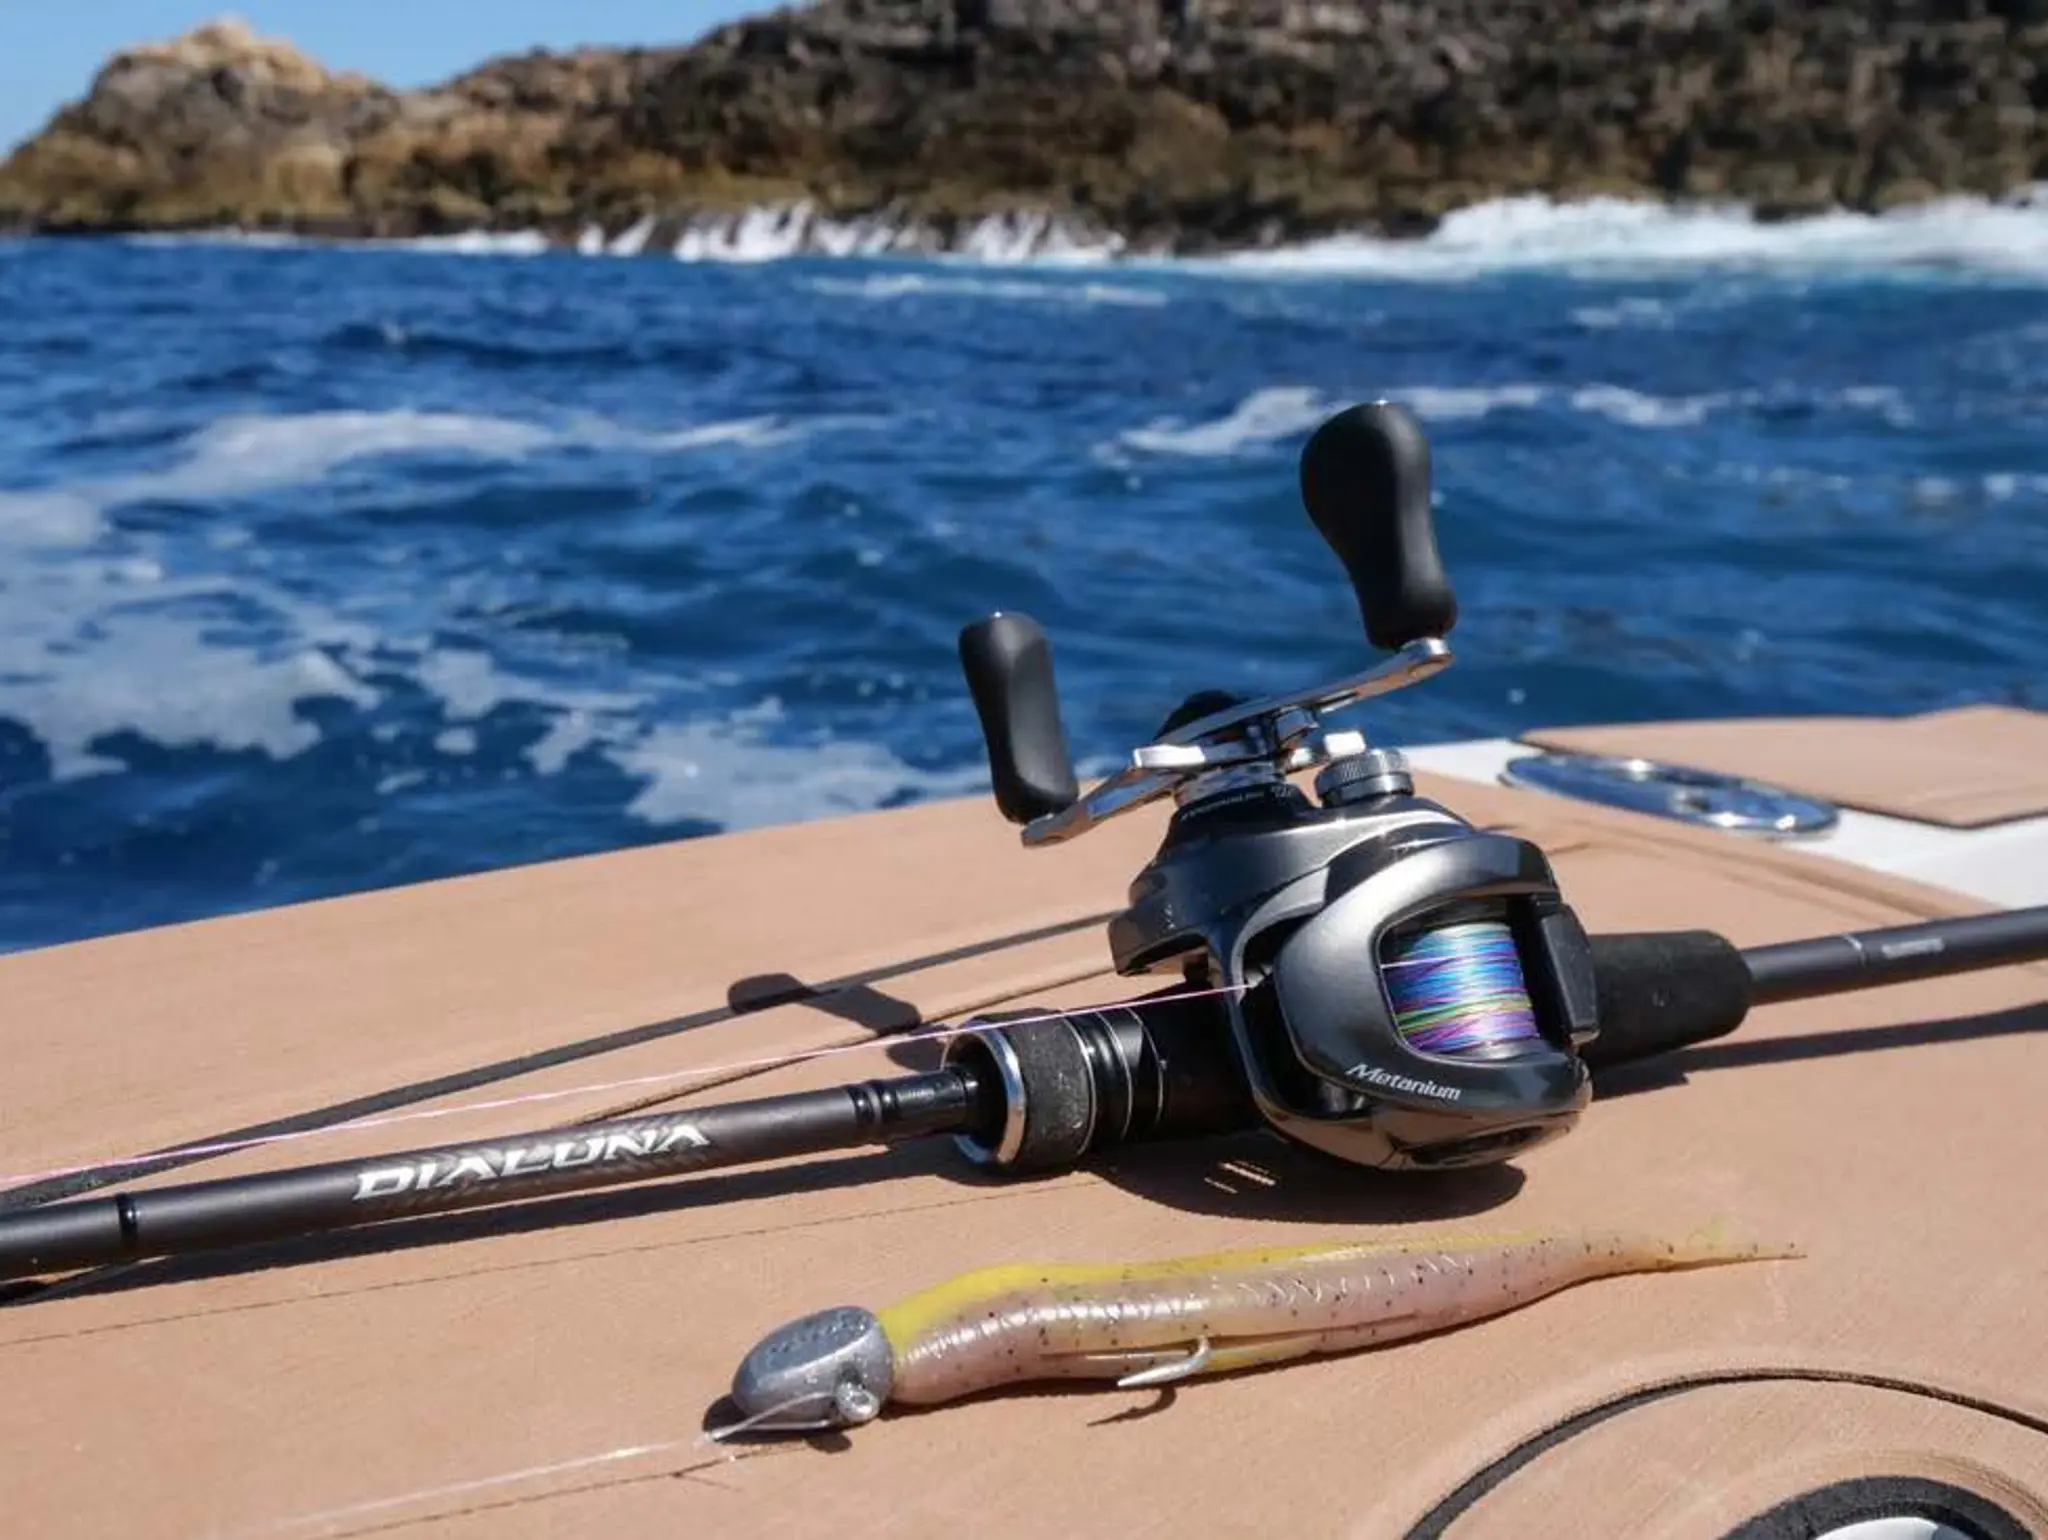 Tackle Test: TWO SHIMANO TOP-END LURE OPTIONS